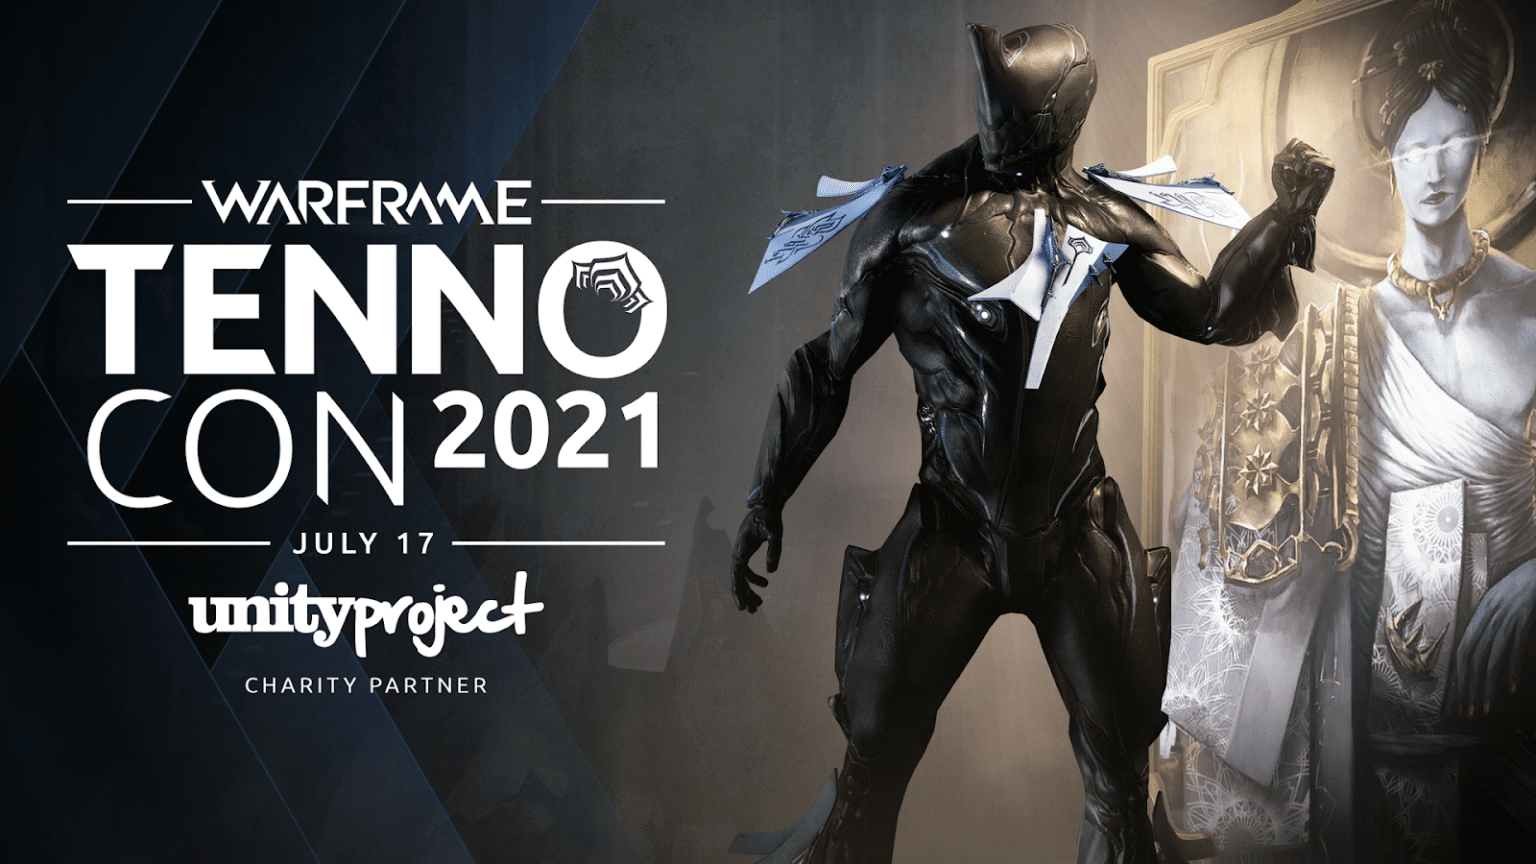 DIGITAL EXTREMES ANNOUNCES WARFRAME’S TENNOCON 2021 DATE AND DETAILS